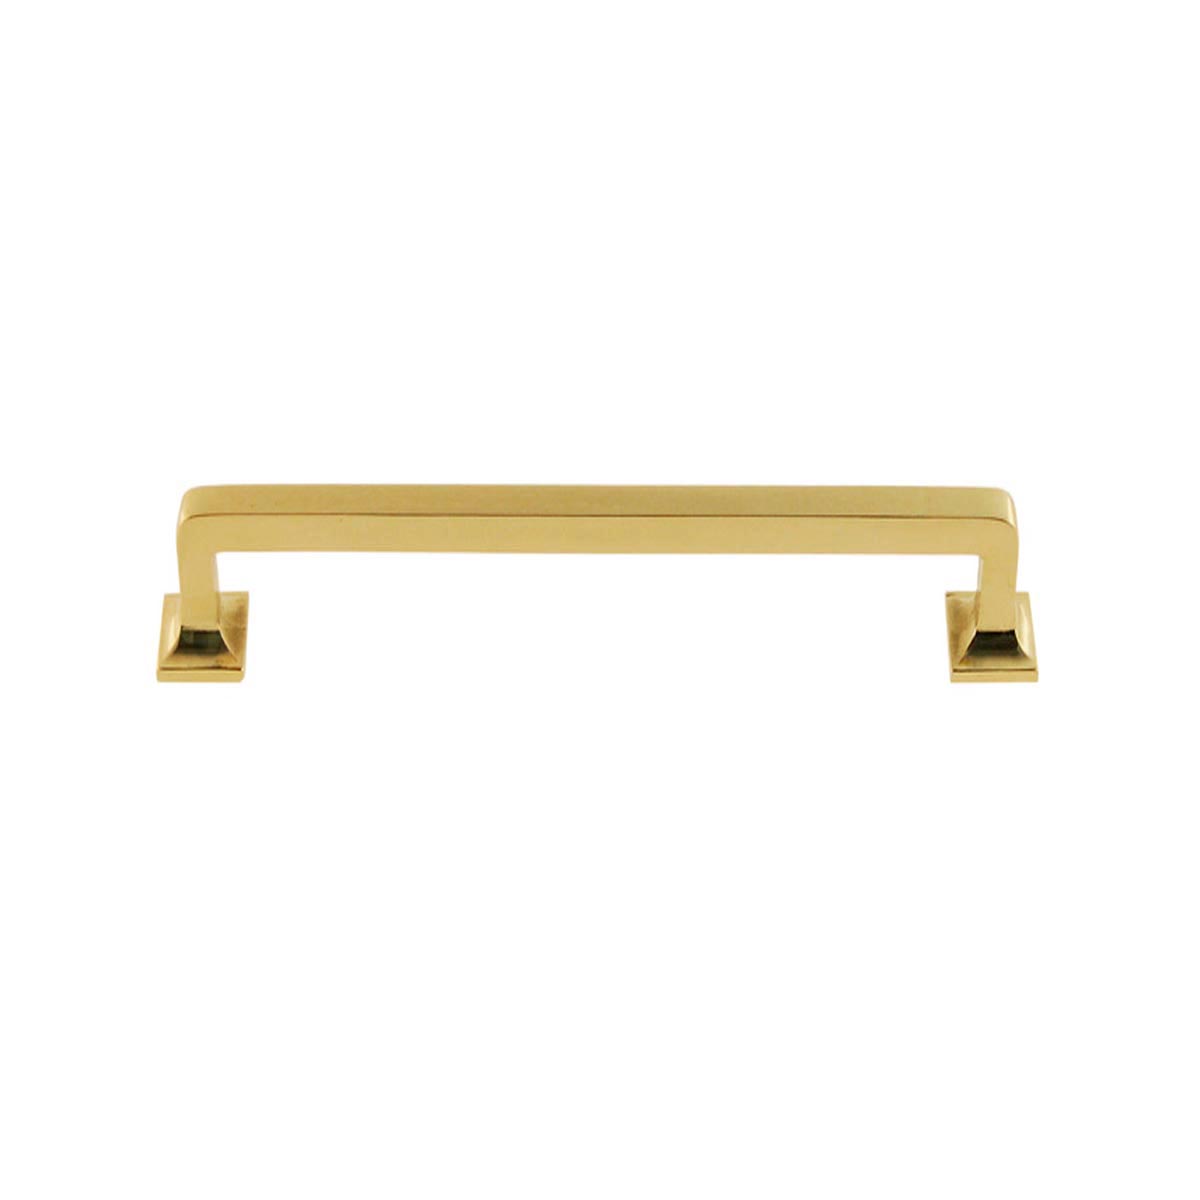 Solid Brass 8" Cabinet Handle, Paxton Hardware